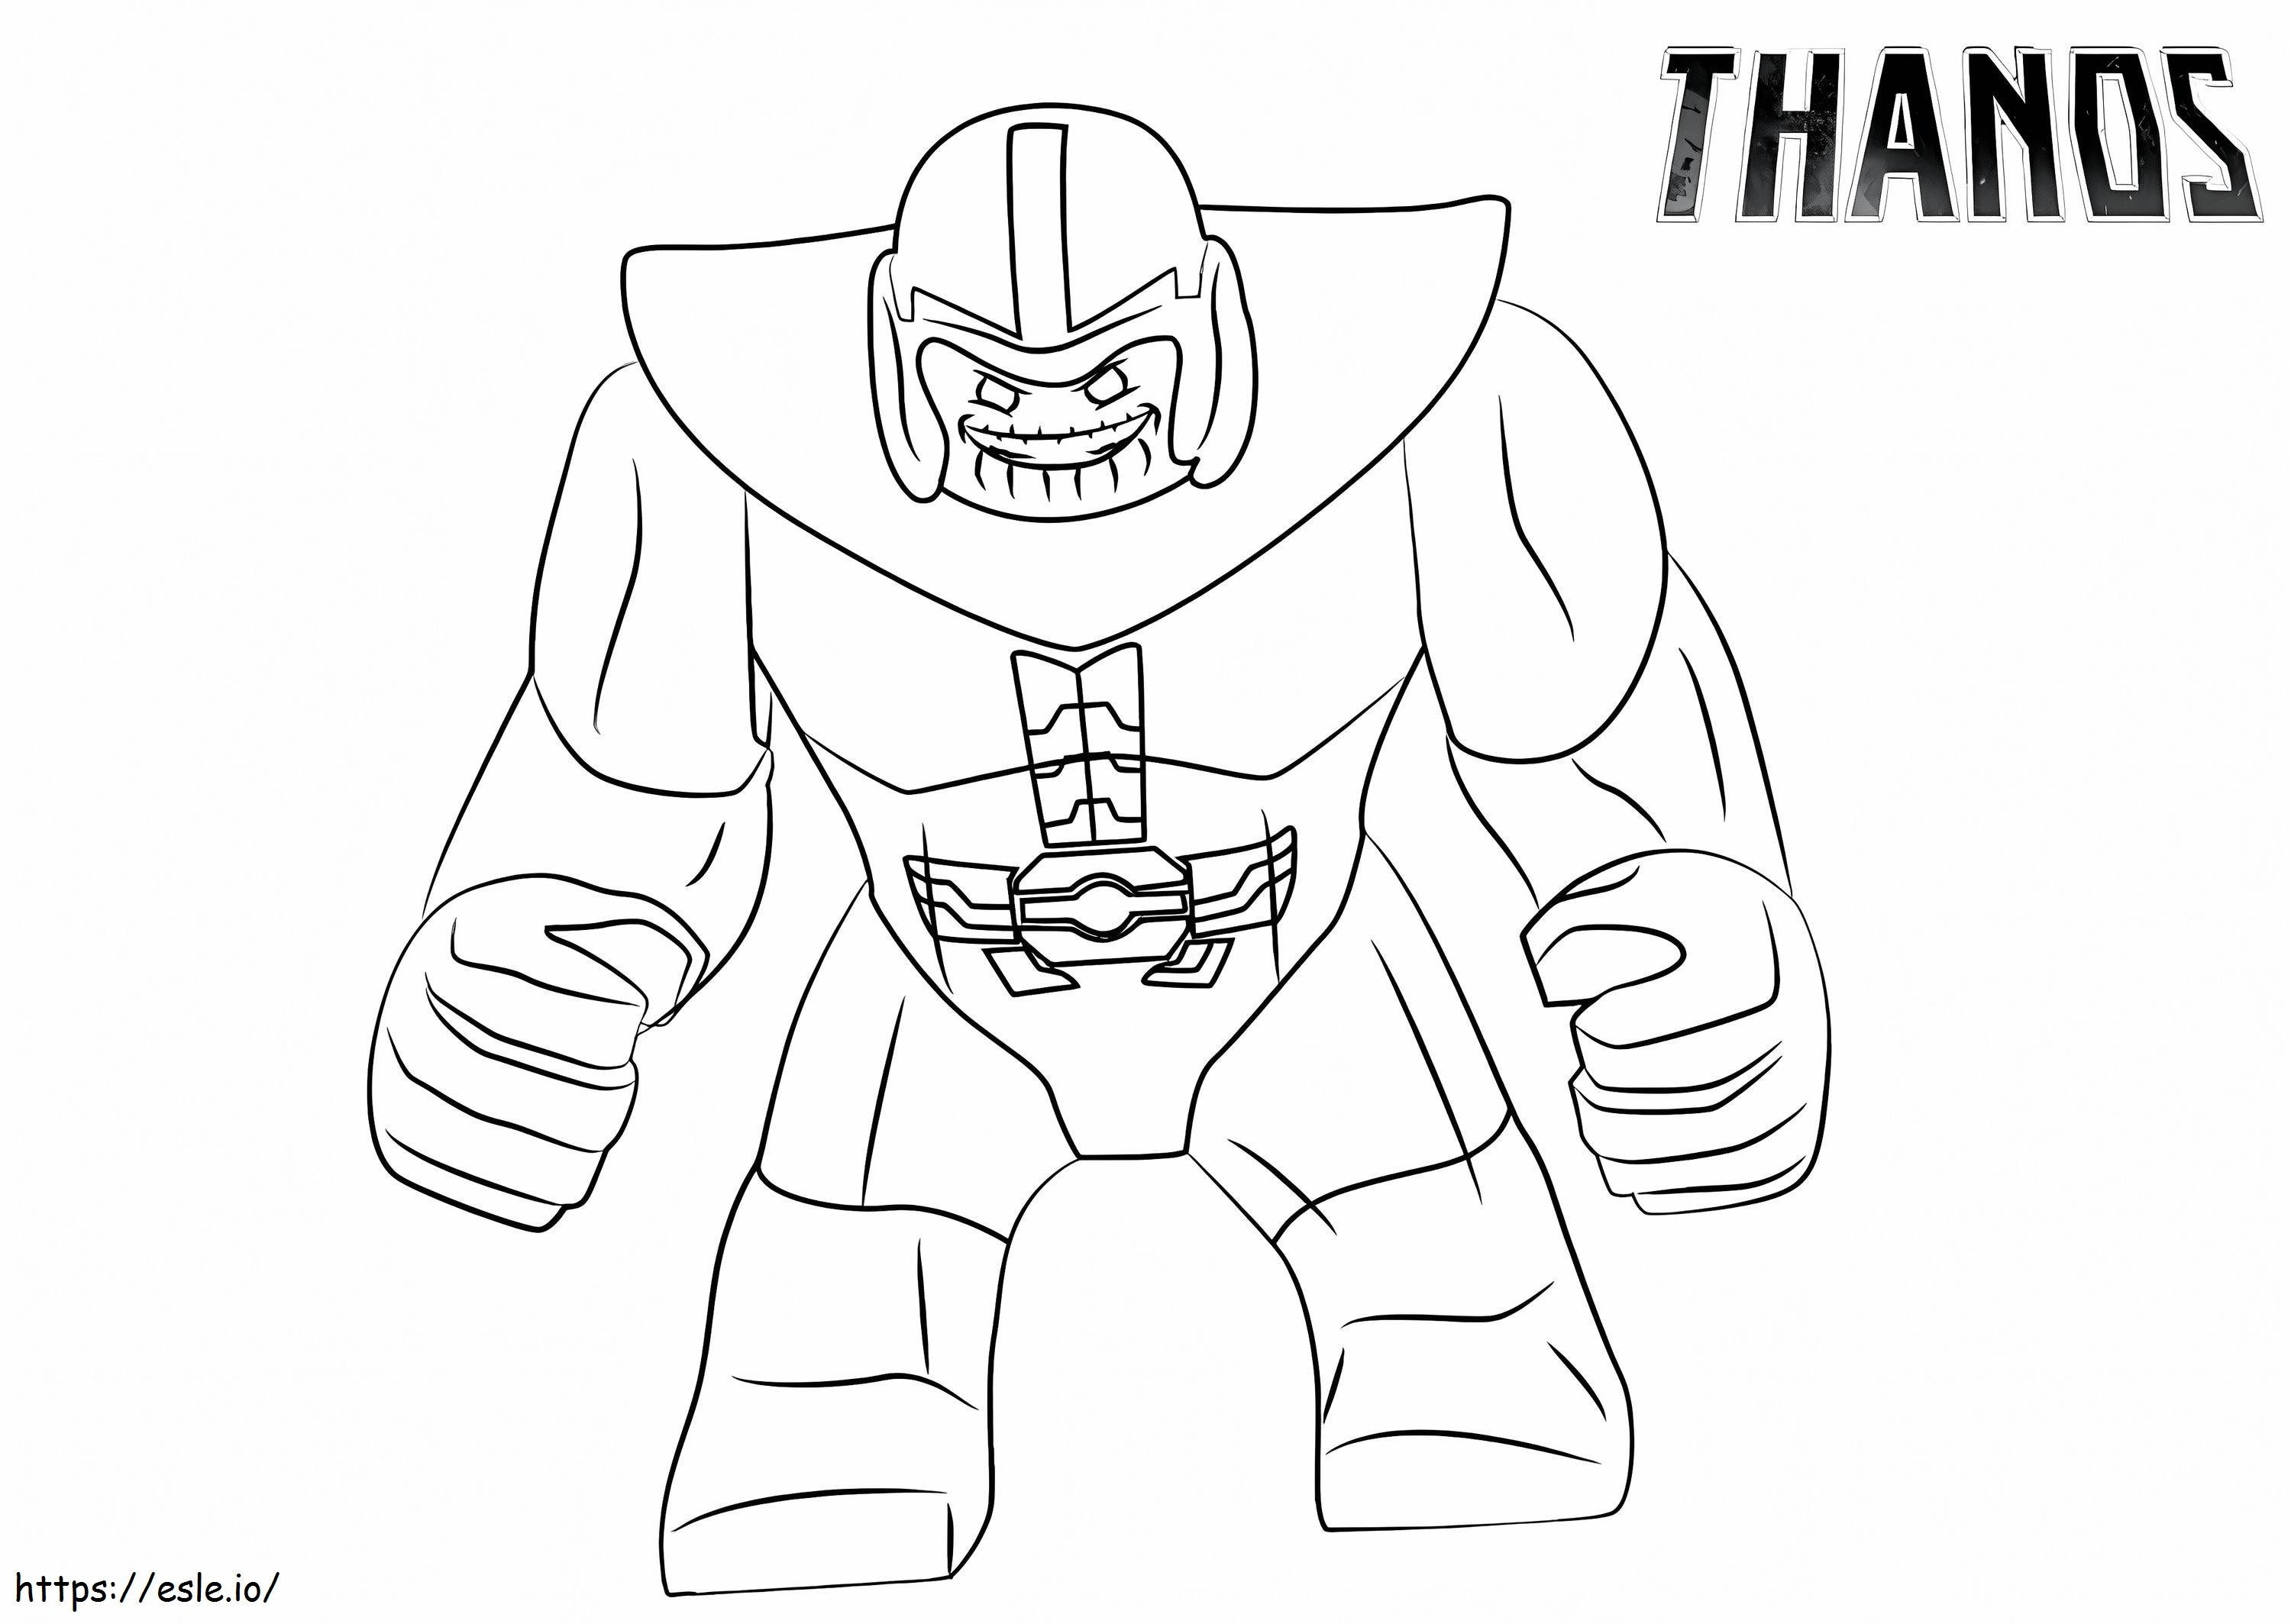 Lego Thanos 2 coloring page